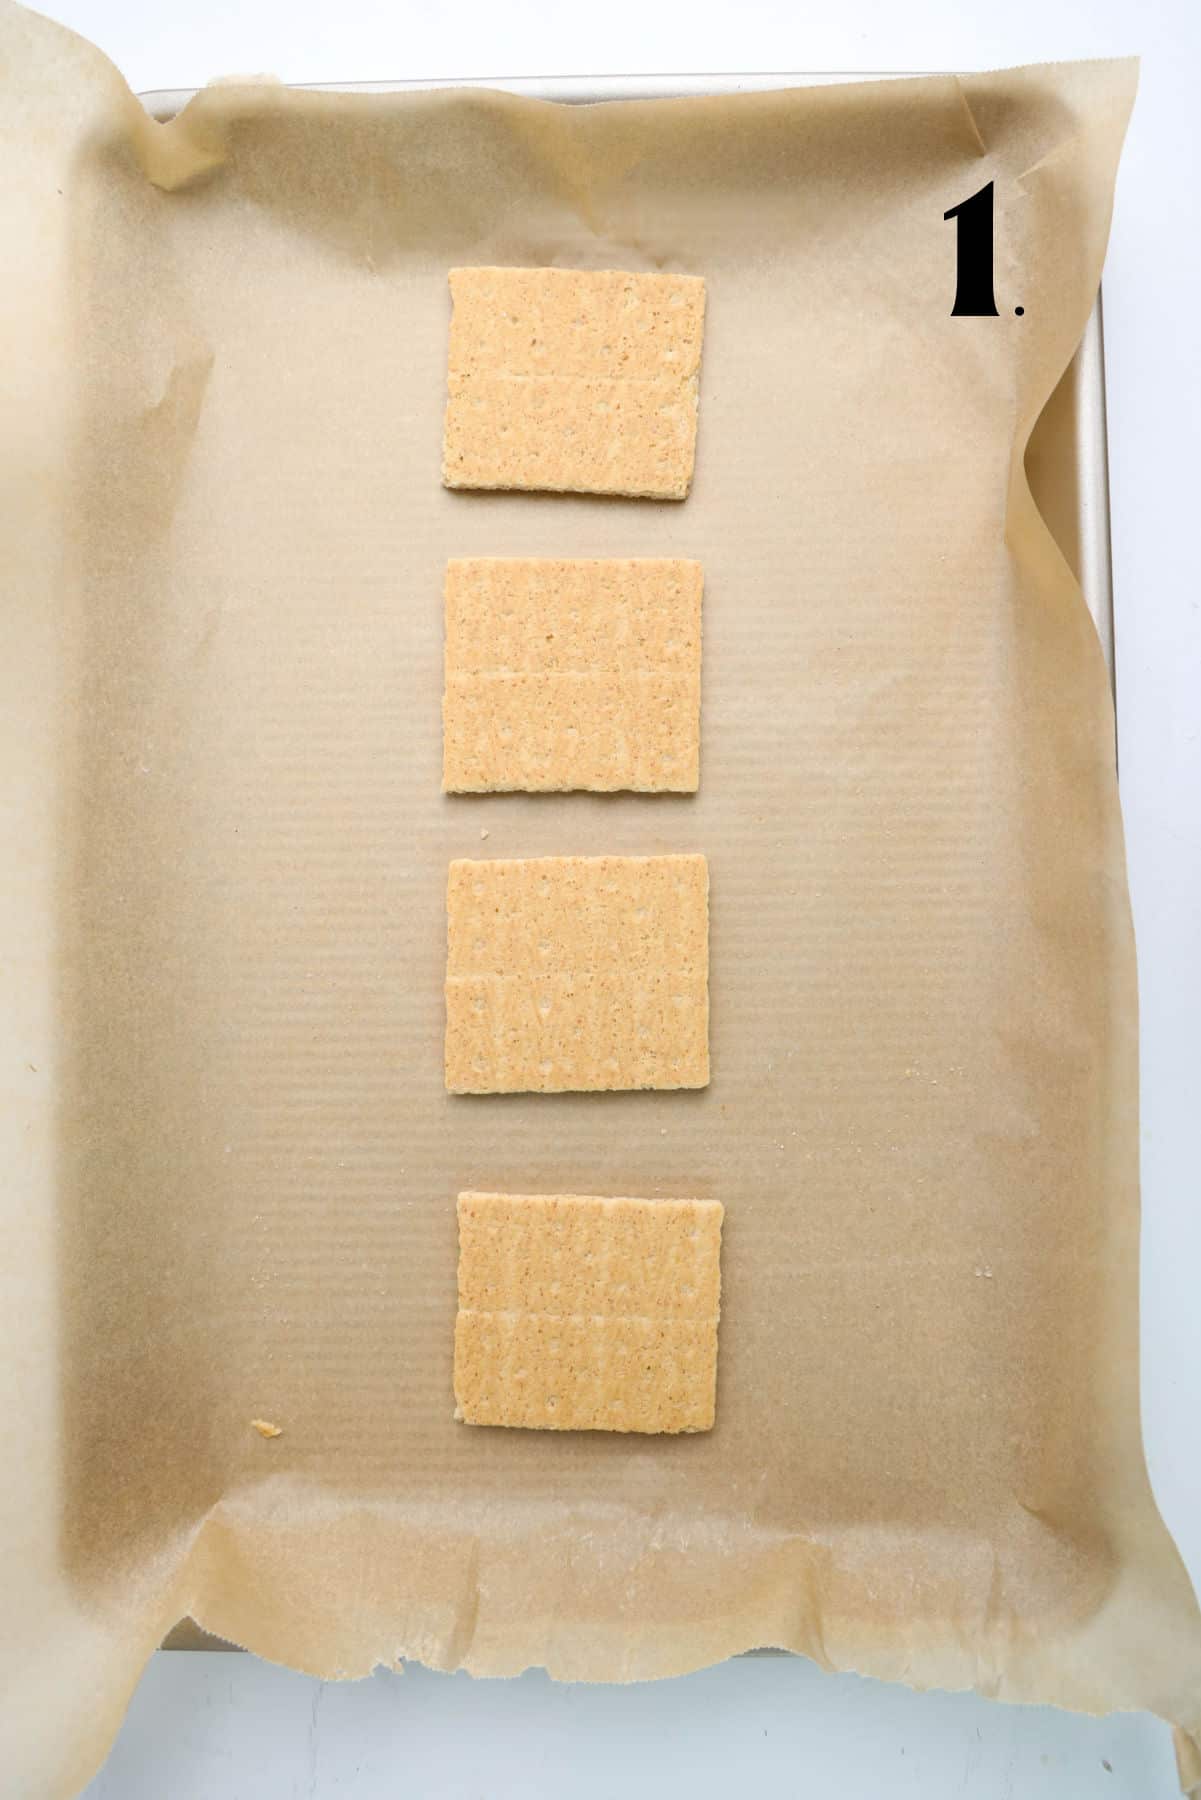 How to Make 4th of July S'mores Step 1 - crackers on parchmaent paper.